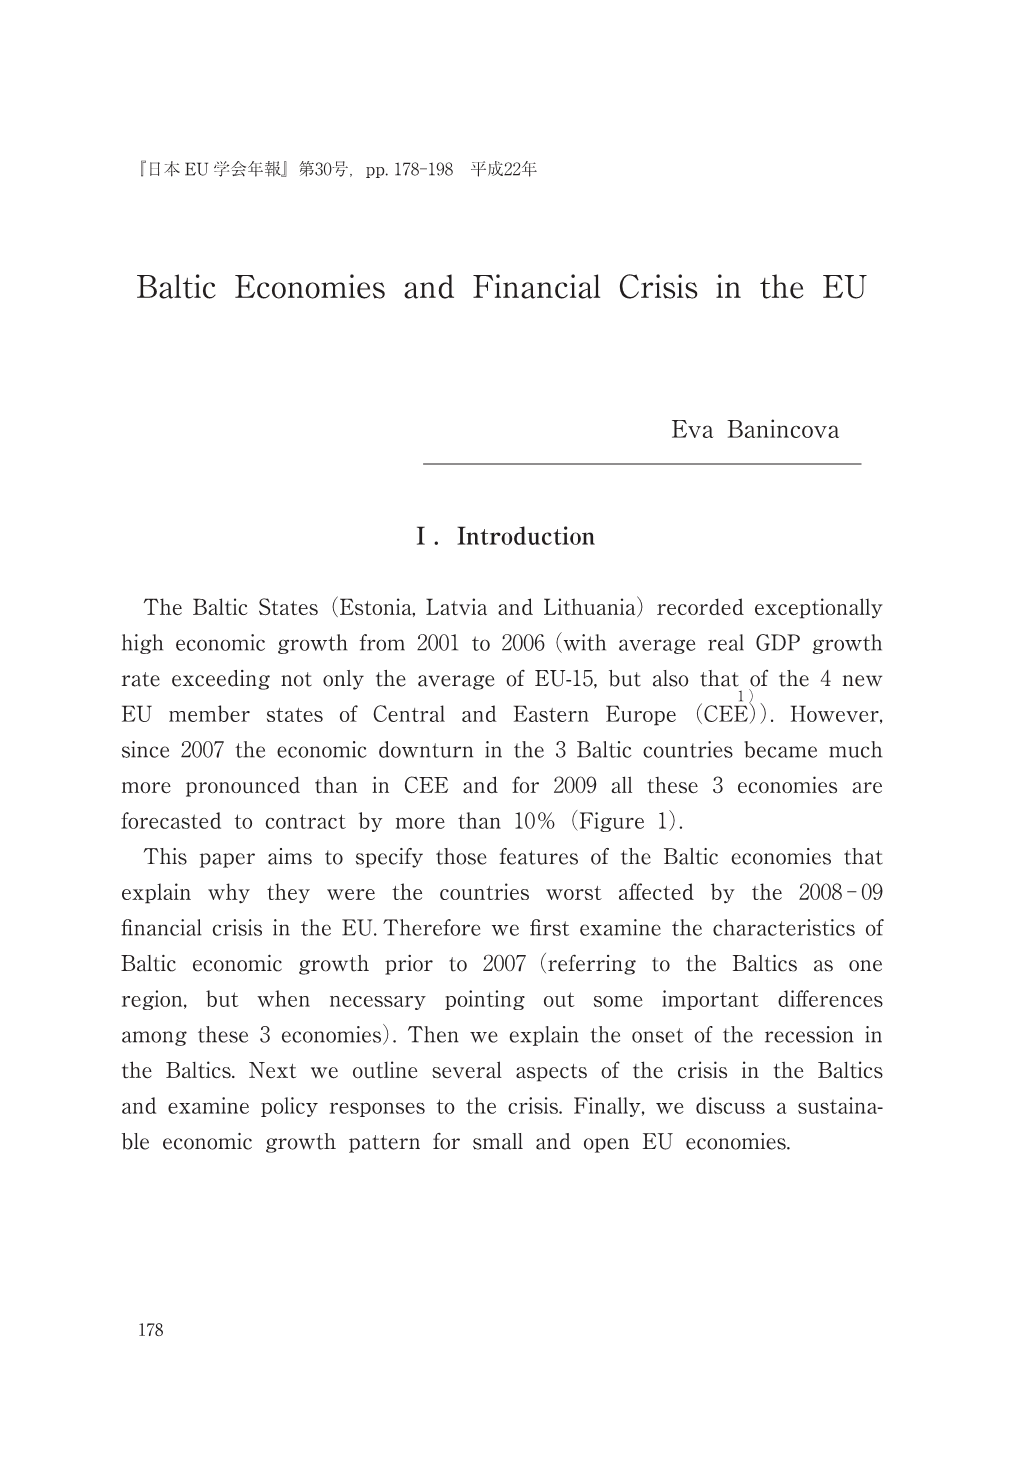 Baltic Economies and Financial Crisis in the EU